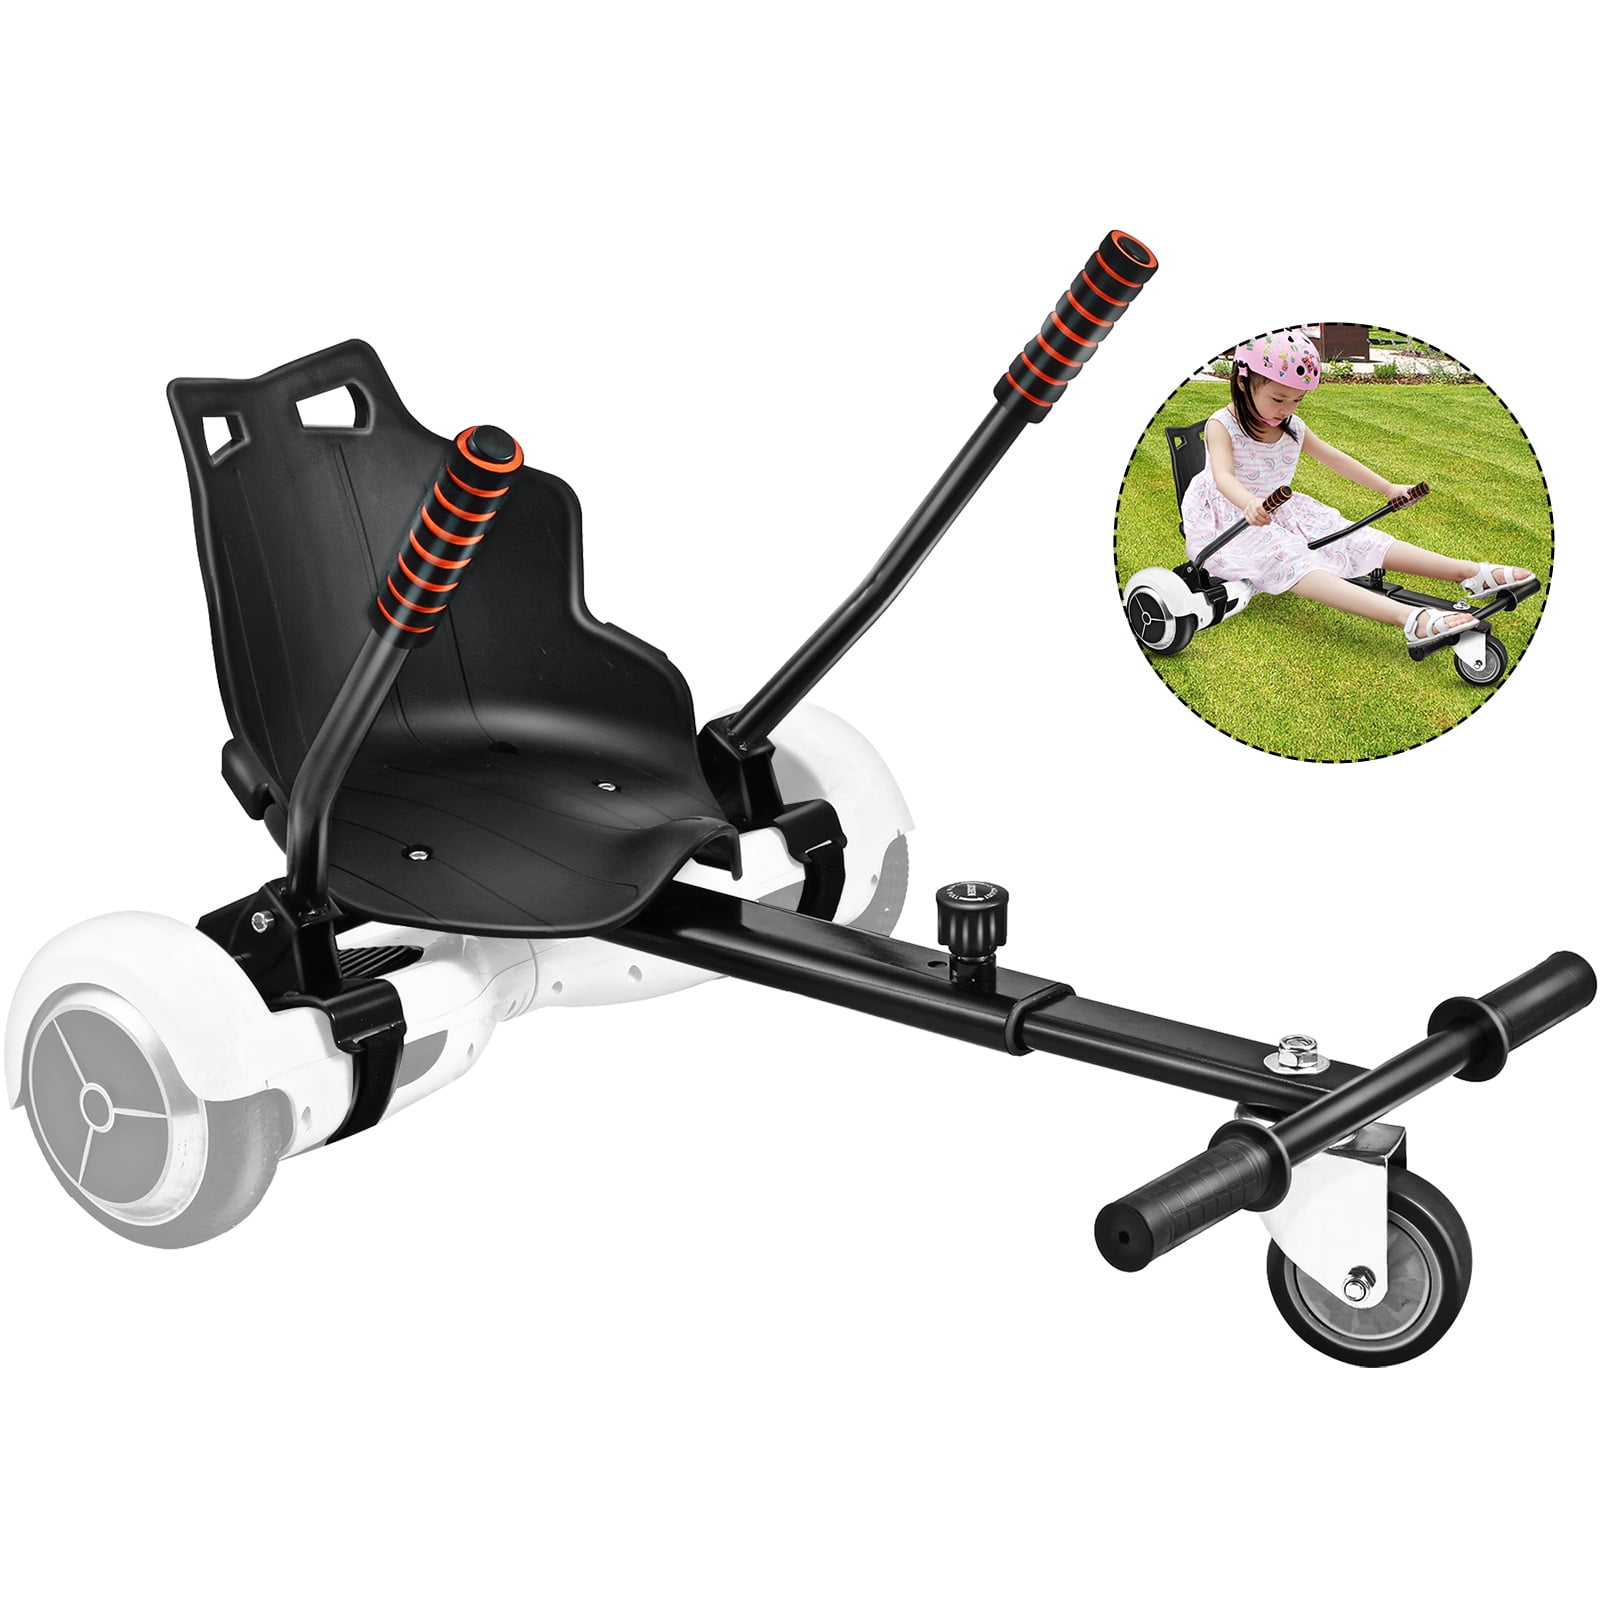 Adjustable Hover cart Go Kart Stand for 6.5" 8" 10" Balancing Scooter USA STOCK 